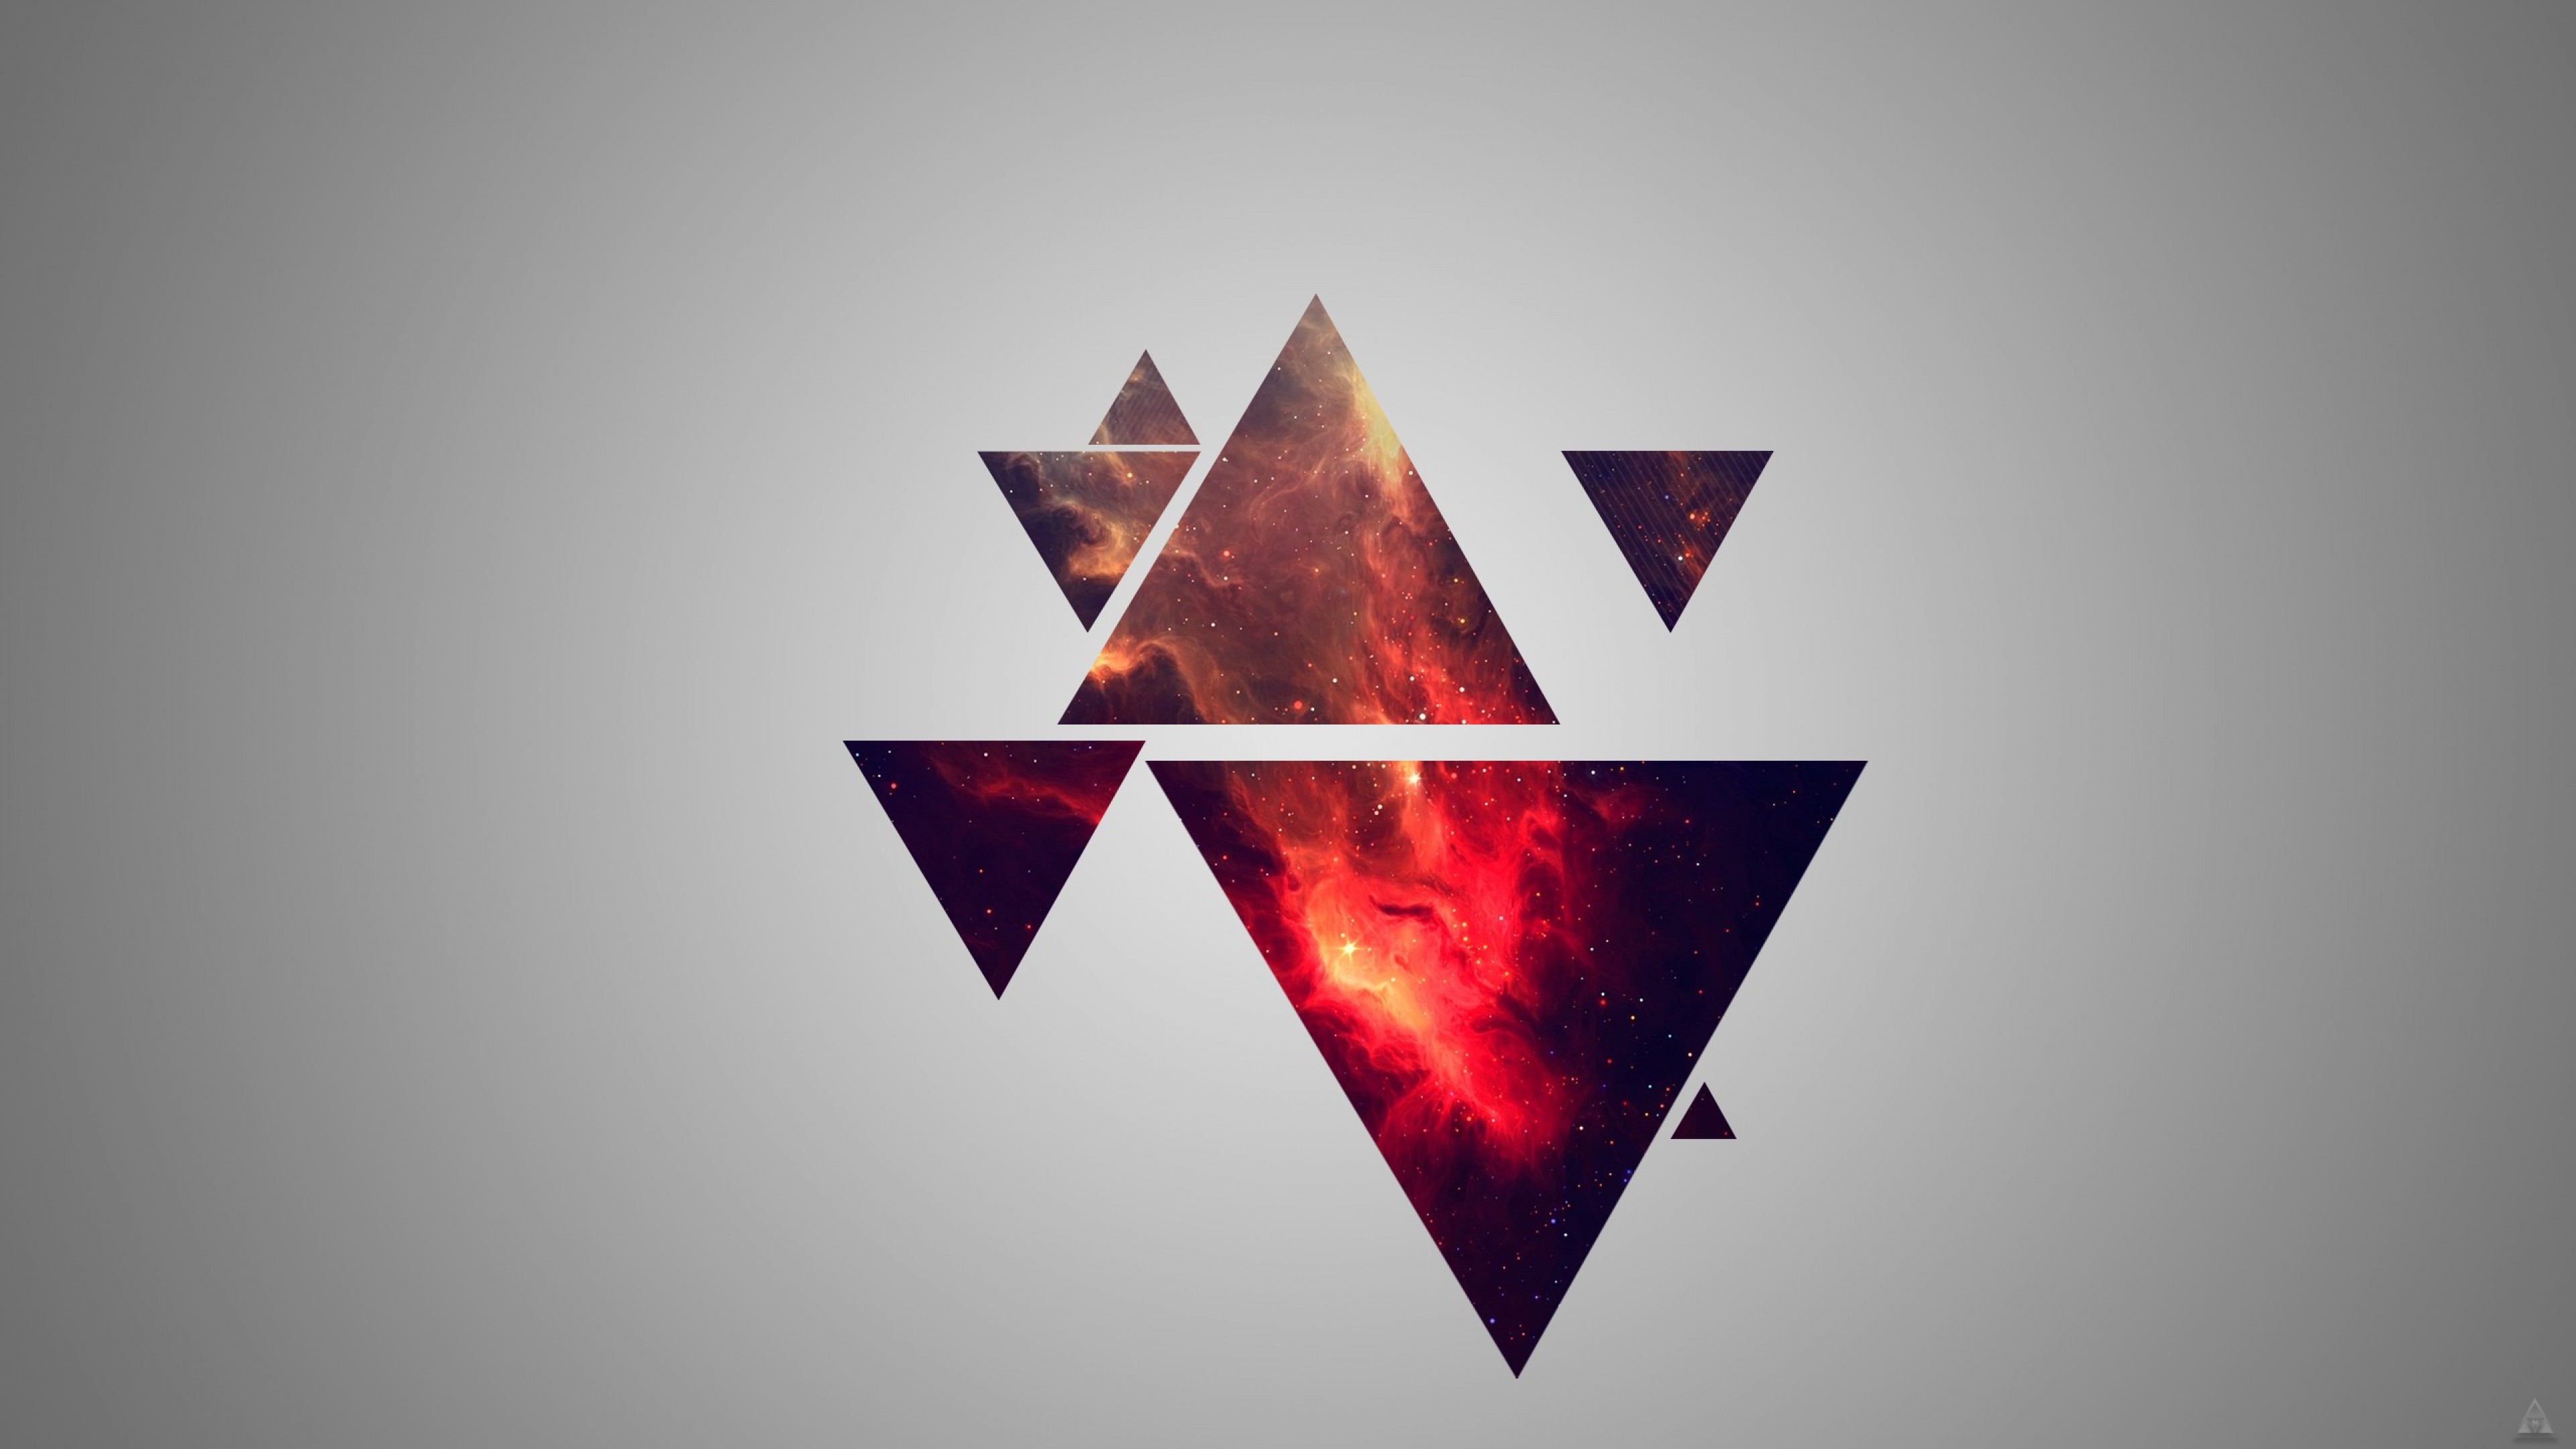 3D Triangle Abstract Design Wallpaper for Desktop and Mobiles 4K Ultra HD